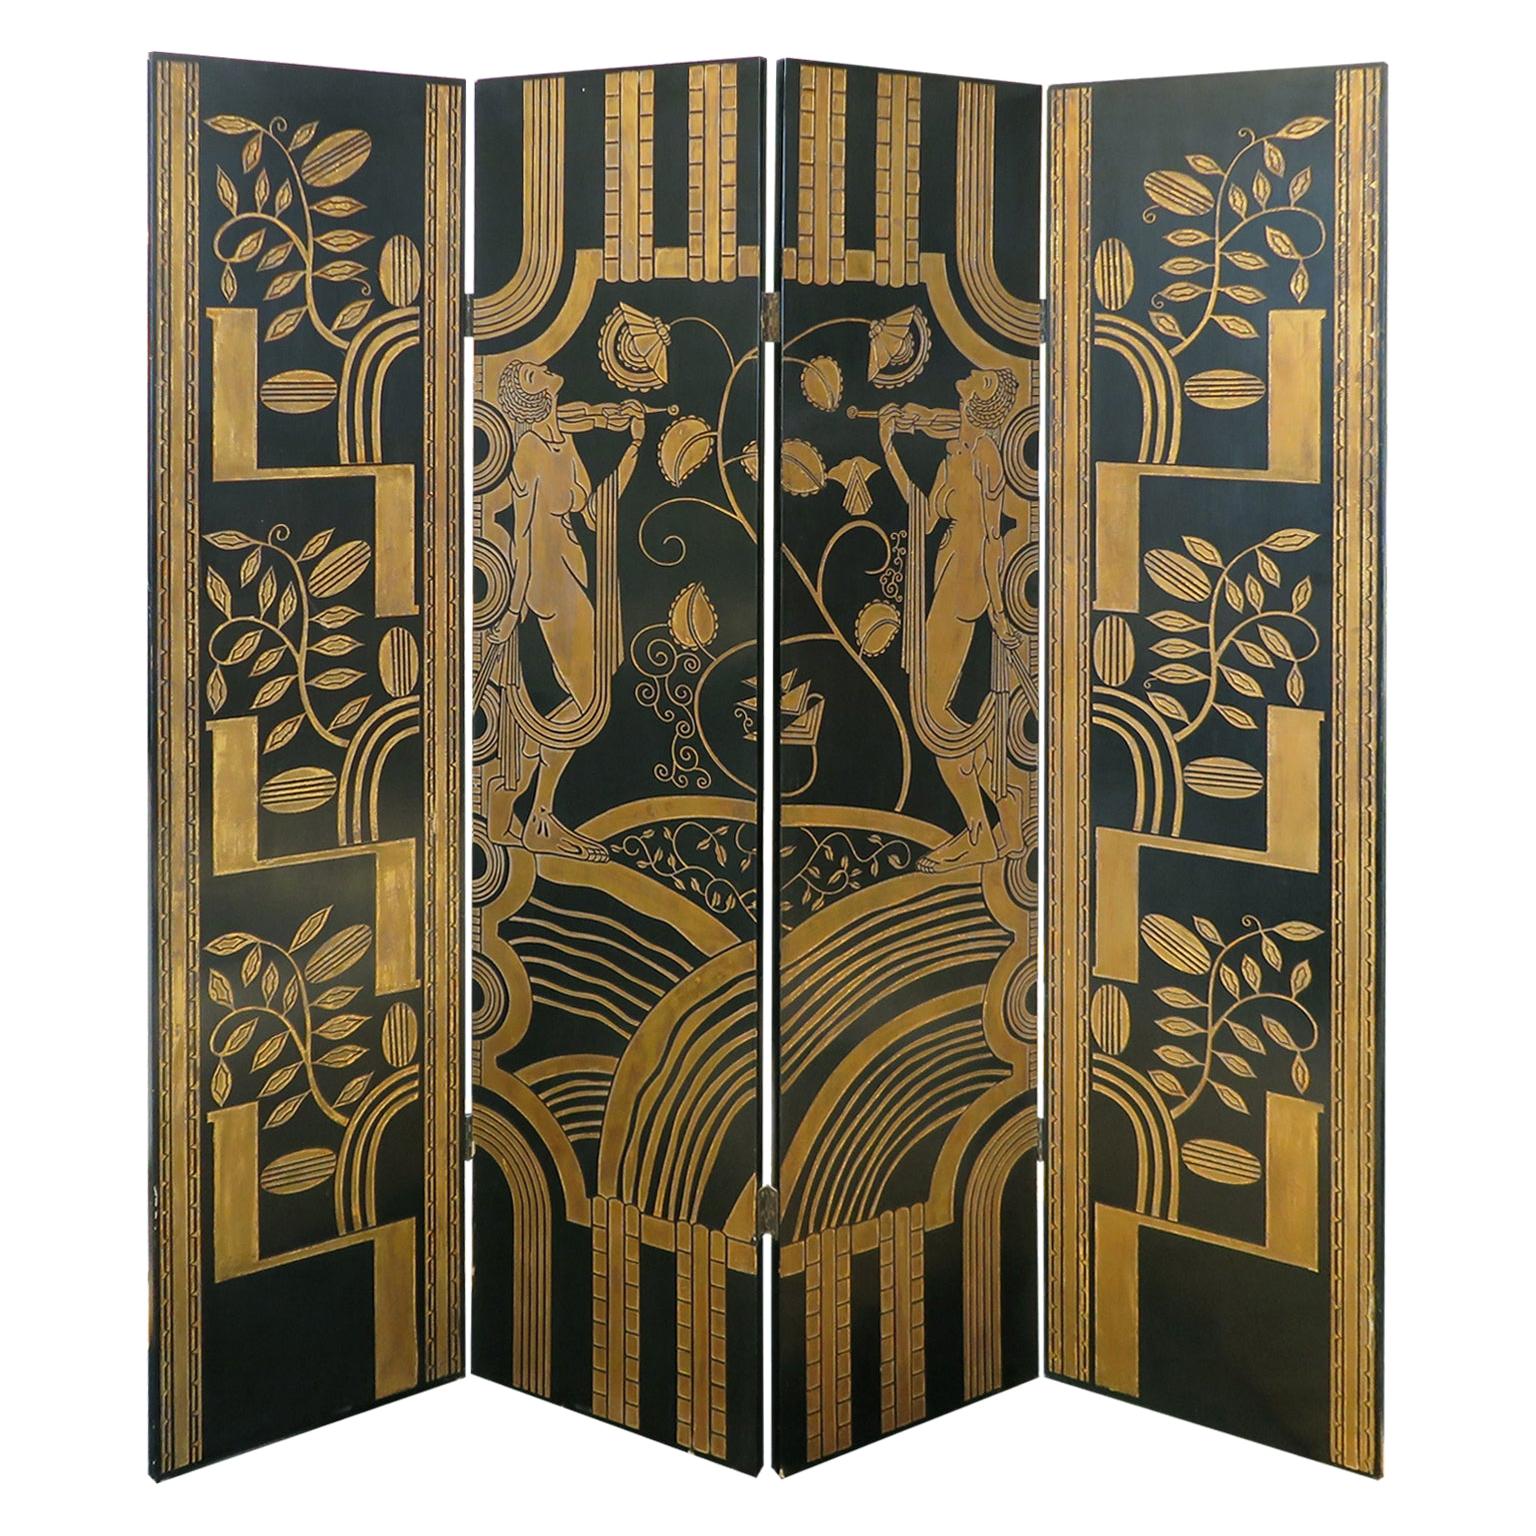 Art Deco Four Panel Screen with Nymph and Nature Motif in Gold Leaf, circa 1930s